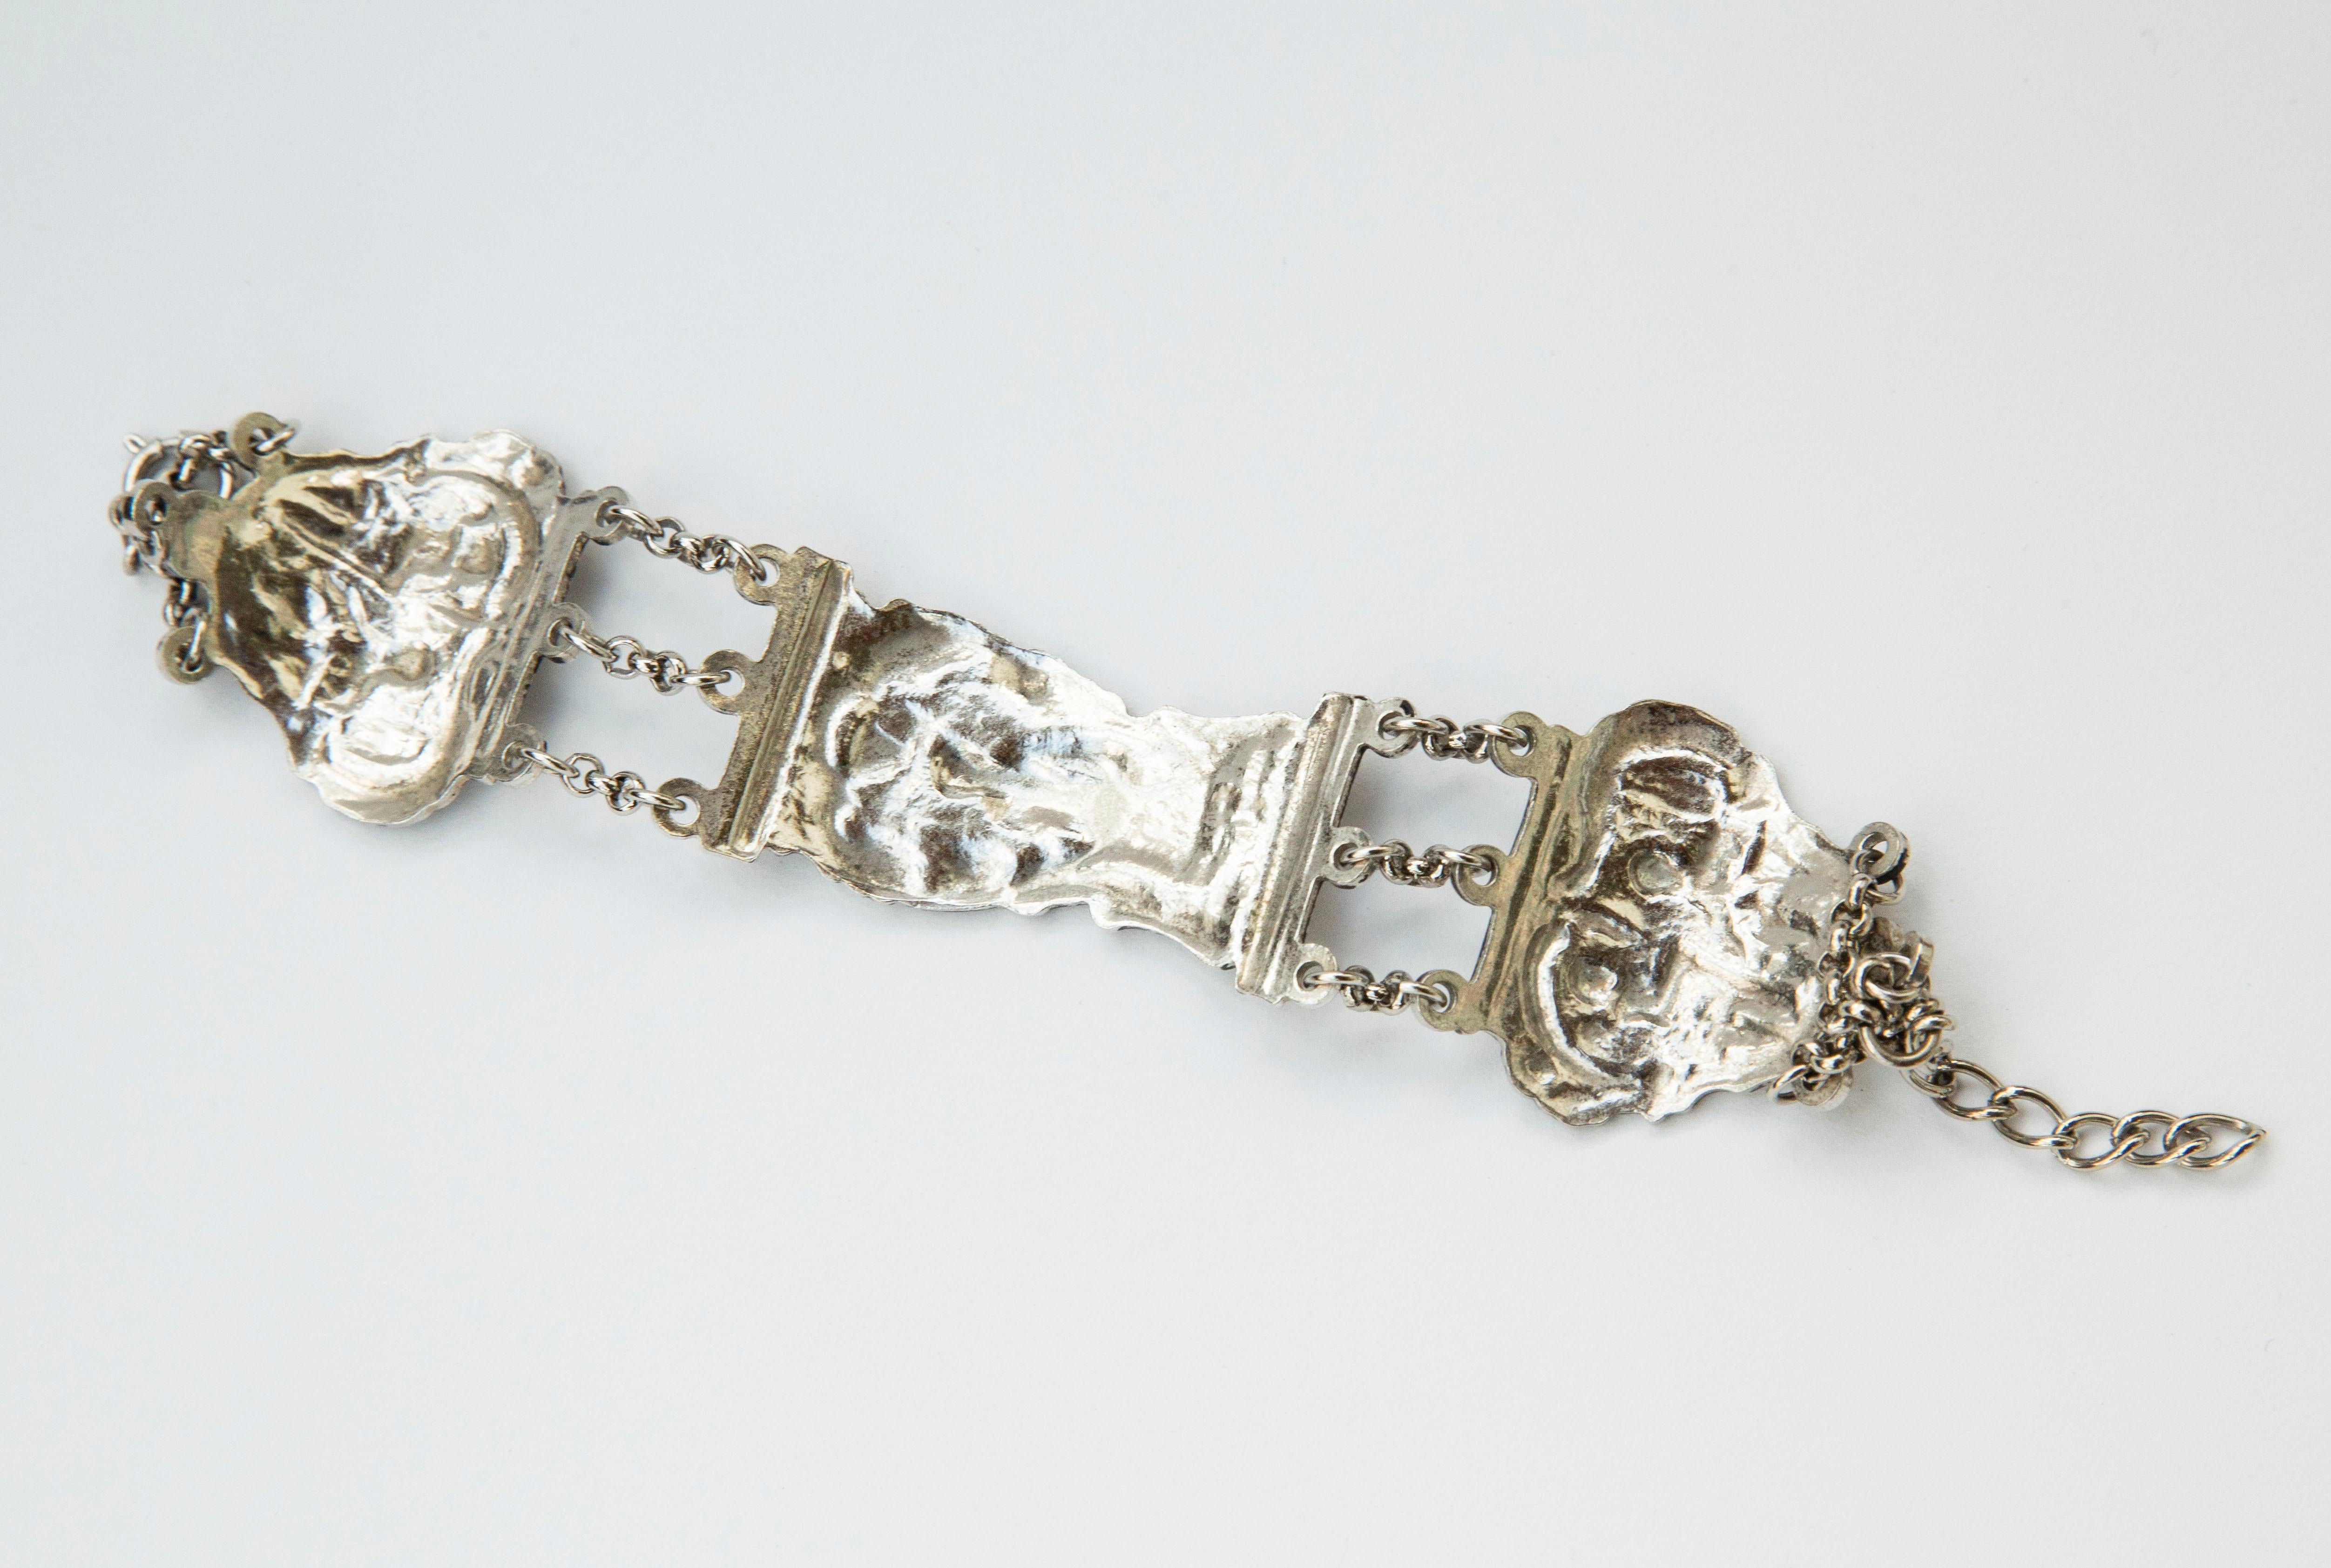 Georgian Silver Bracelet Made of Antique Silver Bible Closure 1700s/1800s For Sale